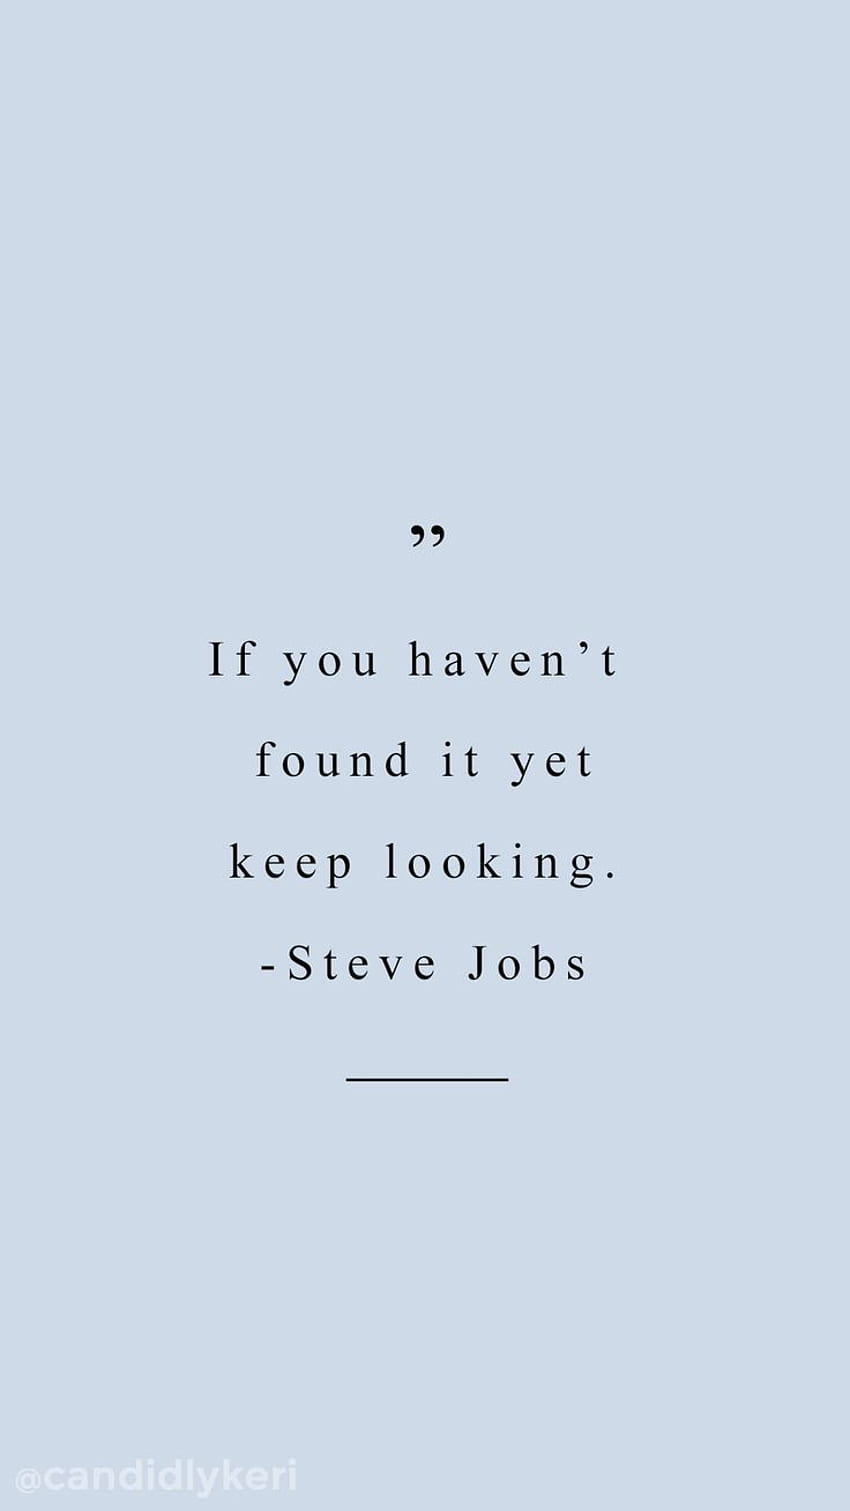 If you haven't found it yet, keep looking Steve Jobs Blue quote HD phone wallpaper